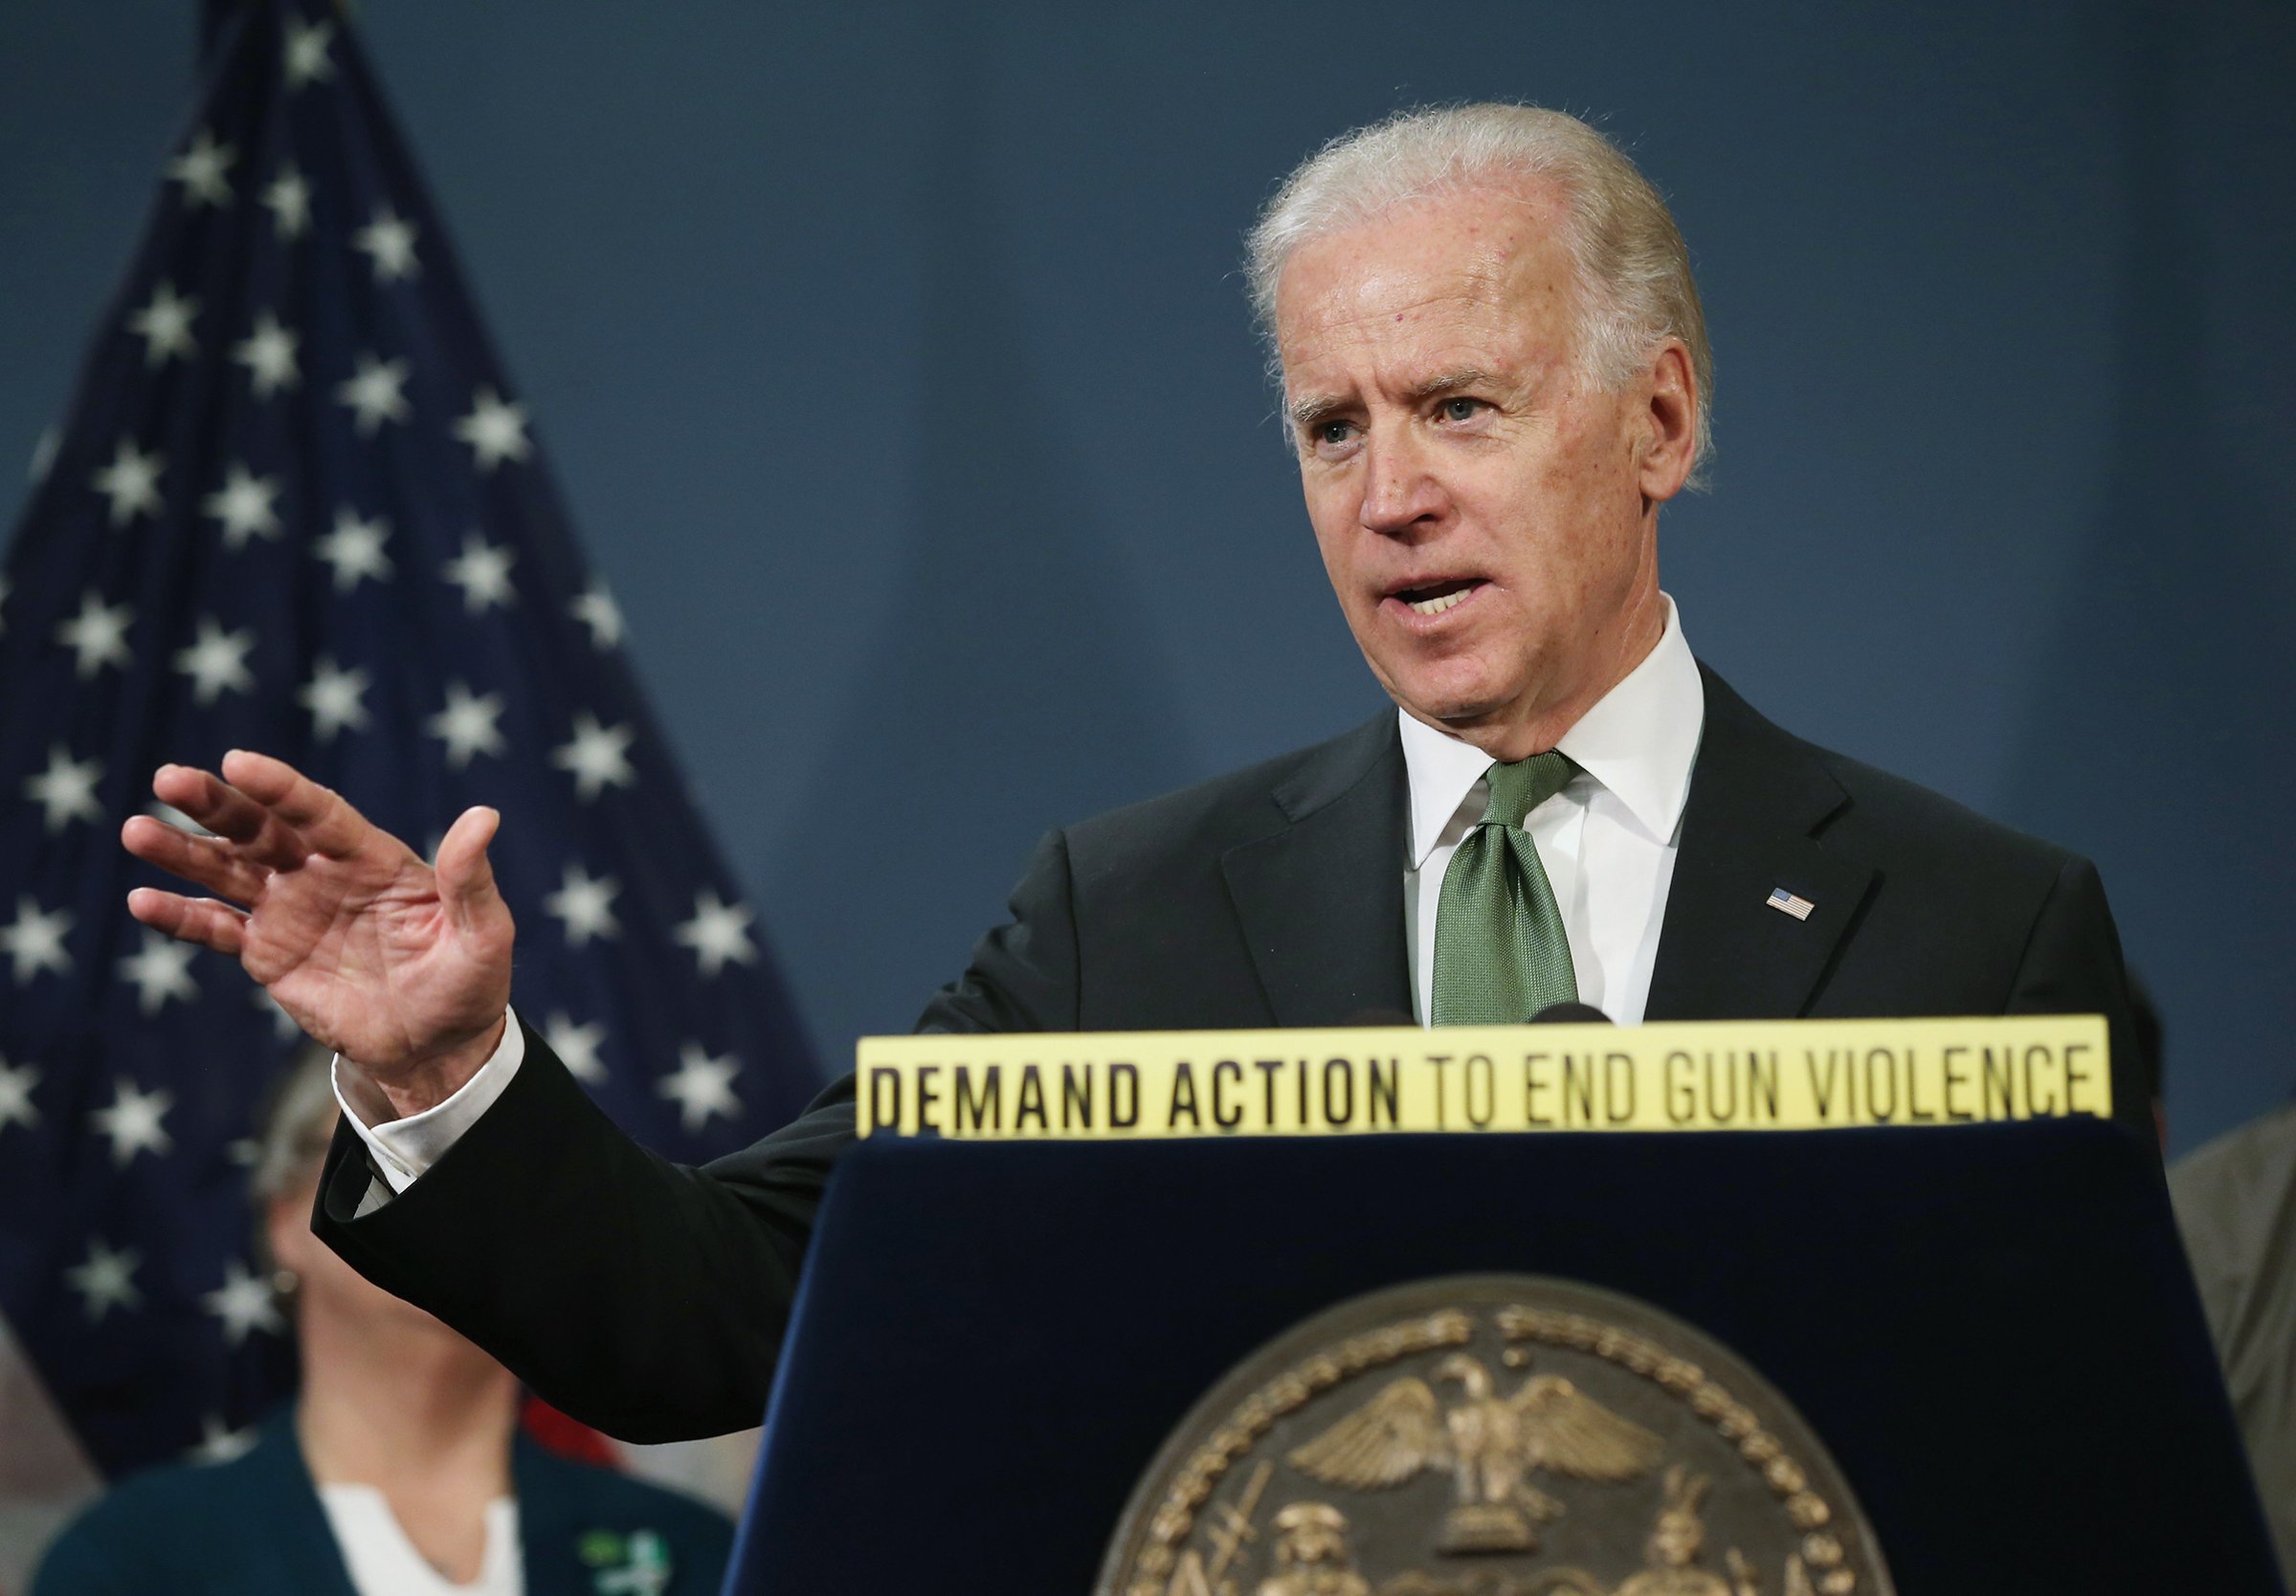 Former Vice President Joe Biden speaks in favor of gun reform legislation at a press conference with family members of Sandy Hook shooting victims on March 21, 2013 in New York City.